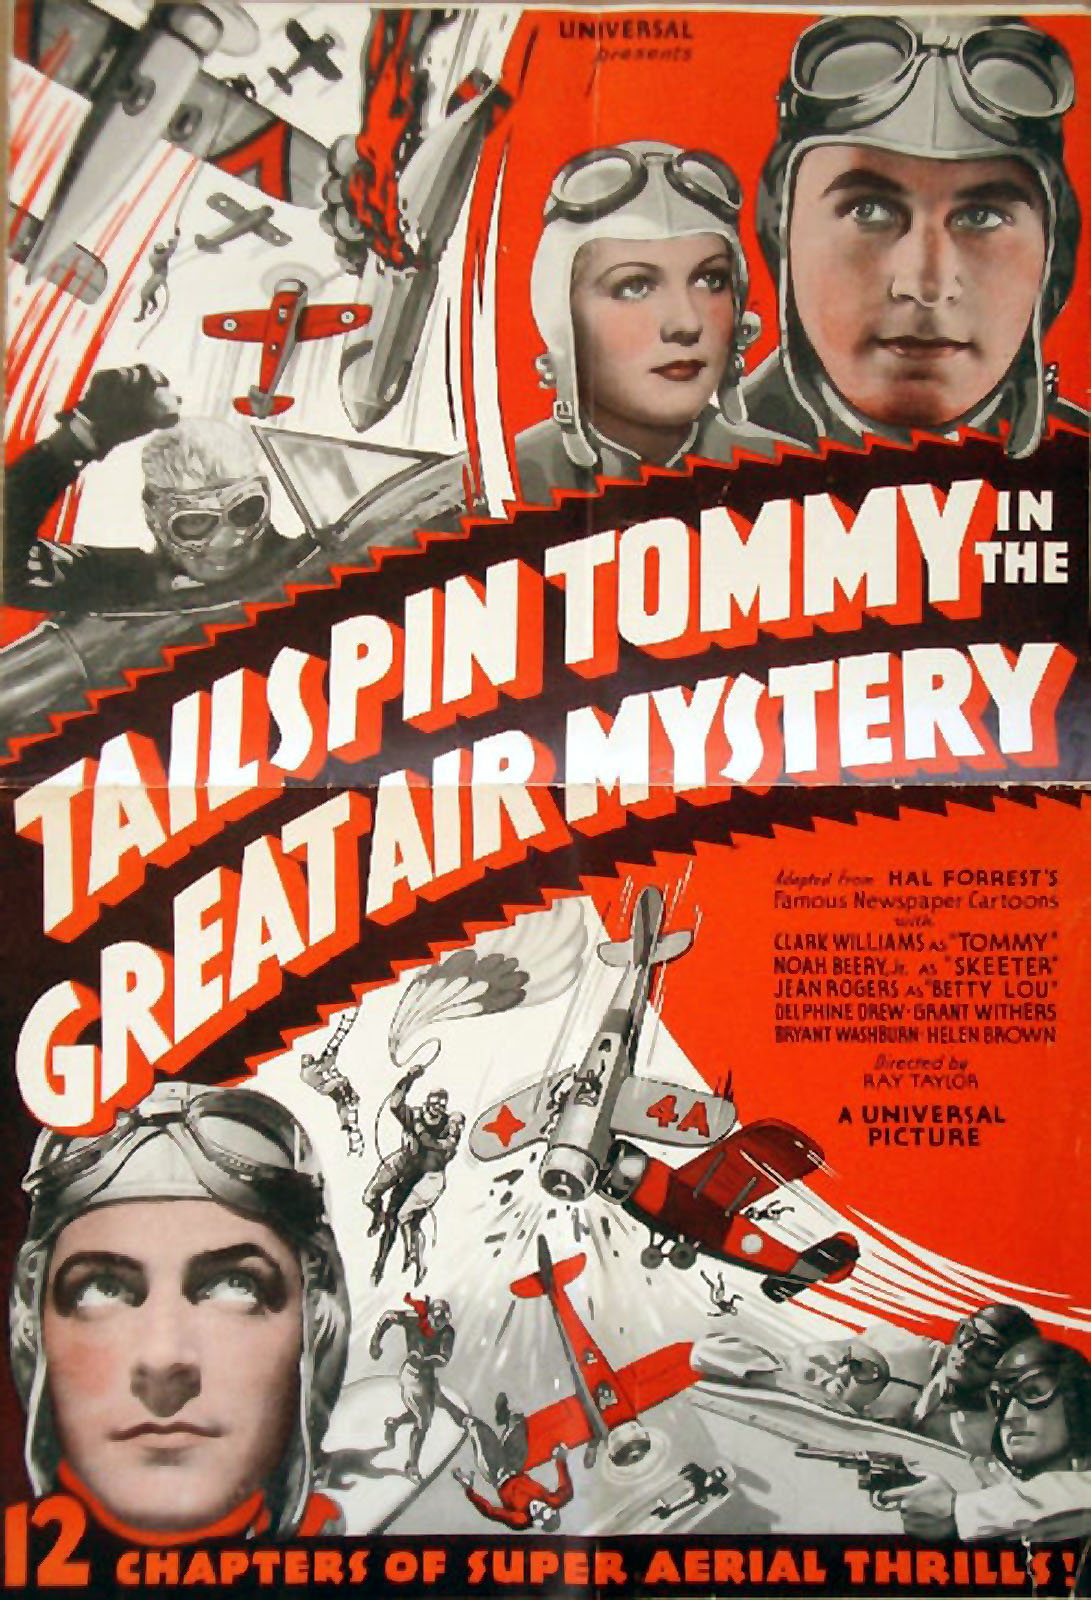 TAILSPIN TOMMY IN THE GREAT AIR MYSTERY